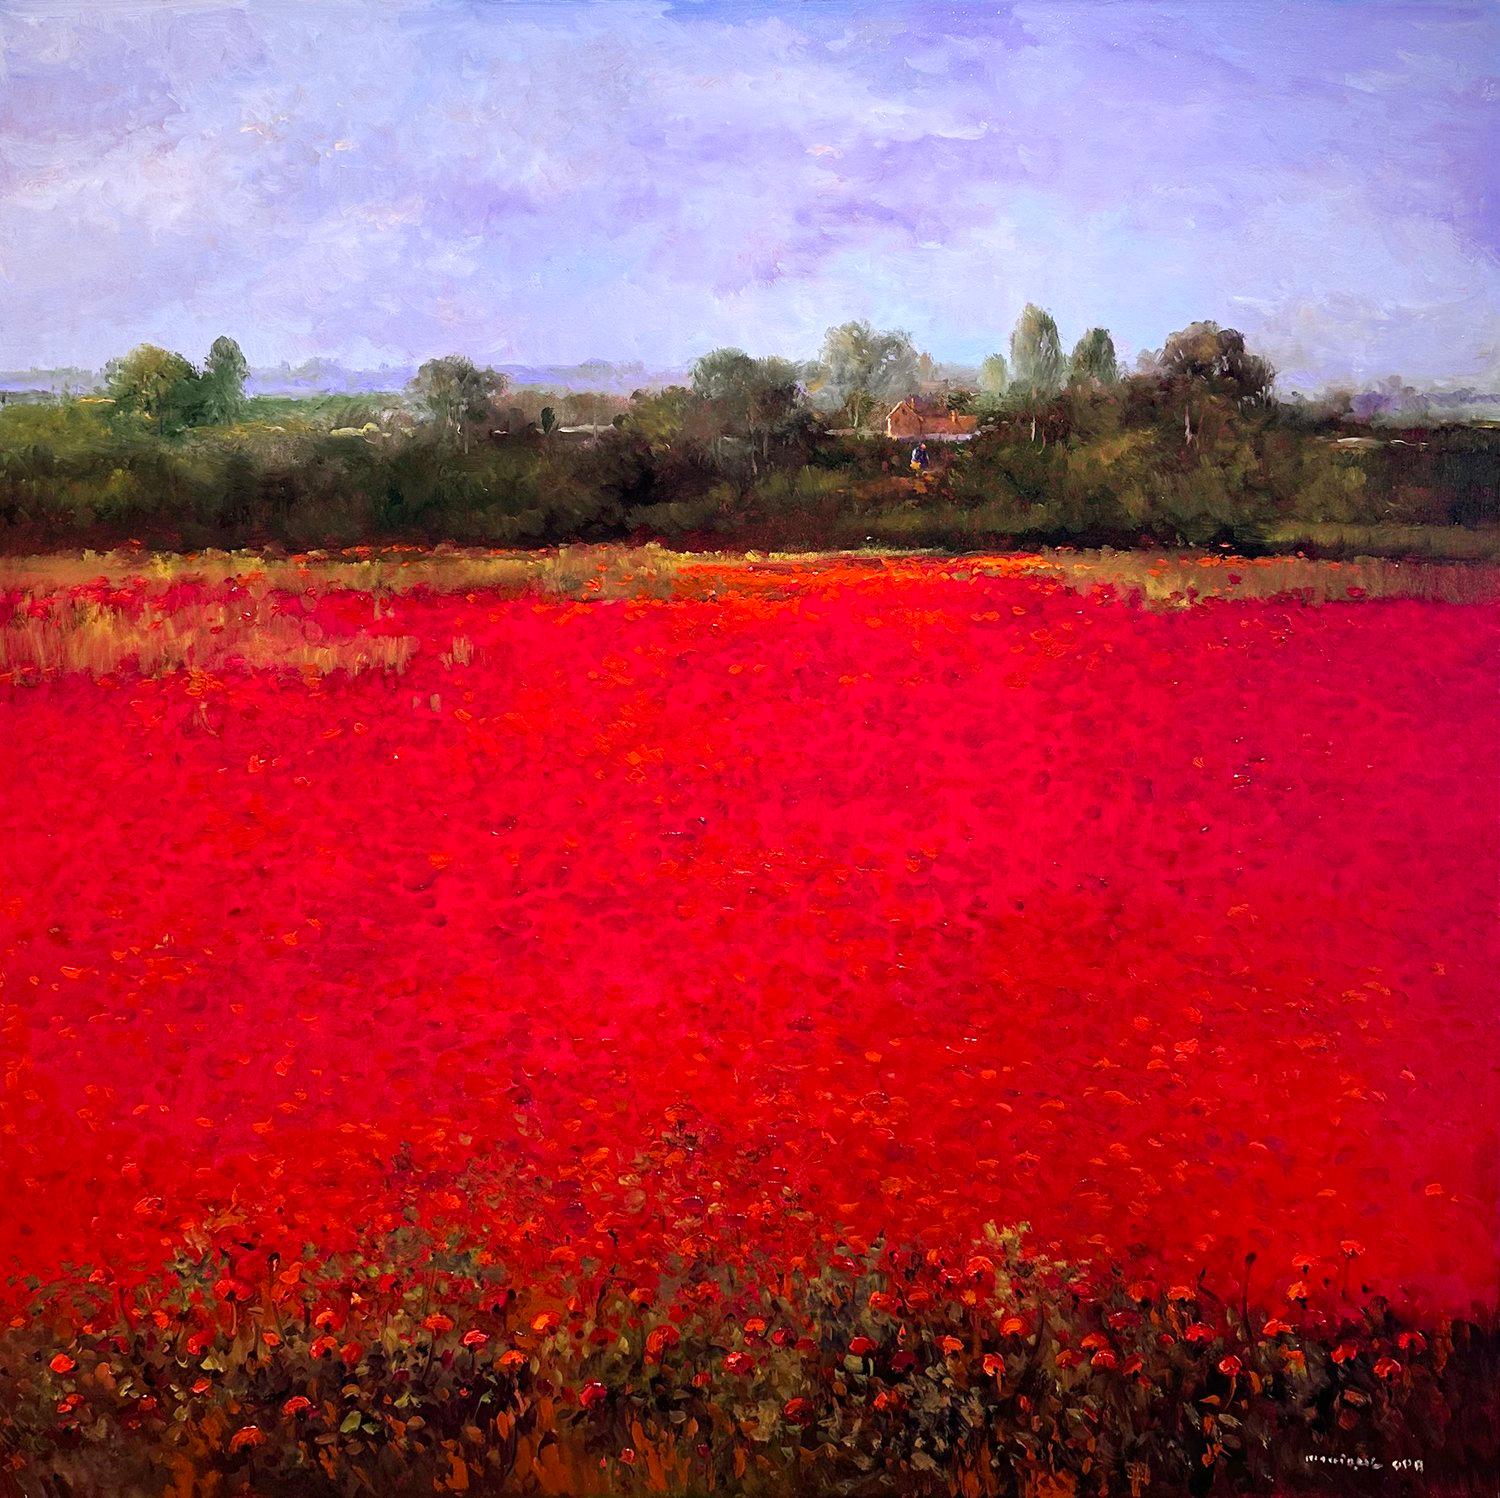 Monique Sakellarios Landscape Painting - Sakellarios, "In the Mood for Poppies", Red Floral Field Landscape Oil Painting 